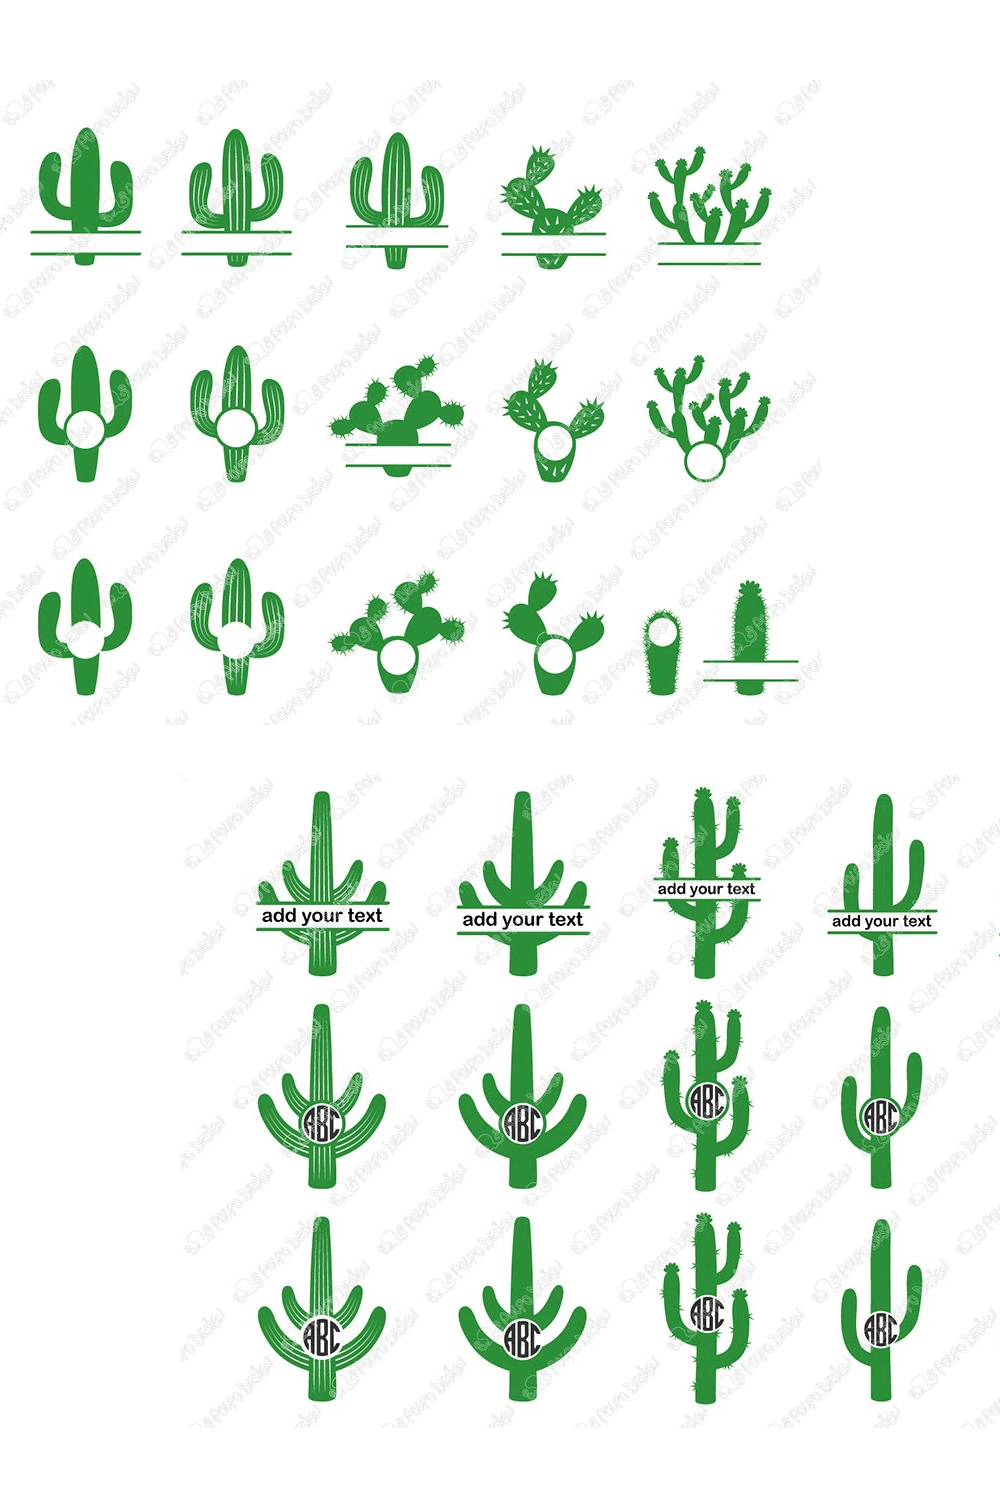 Green Cactuses on White Background.